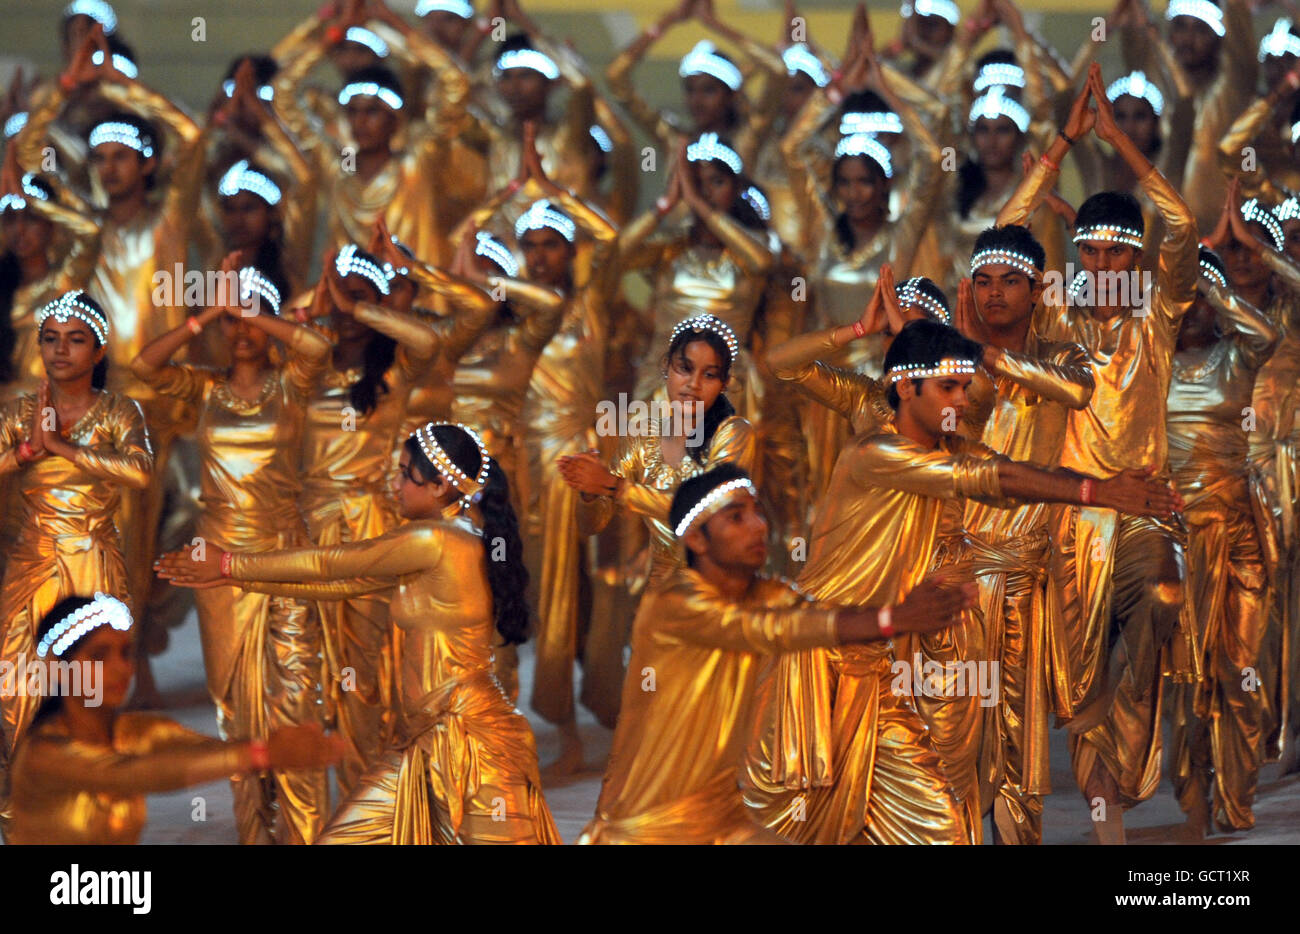 Dancers perform during the 2010 Commonwealth Games opening ceremony at the Jawaharlal Nehru Stadium in New Delhi, India. Stock Photo